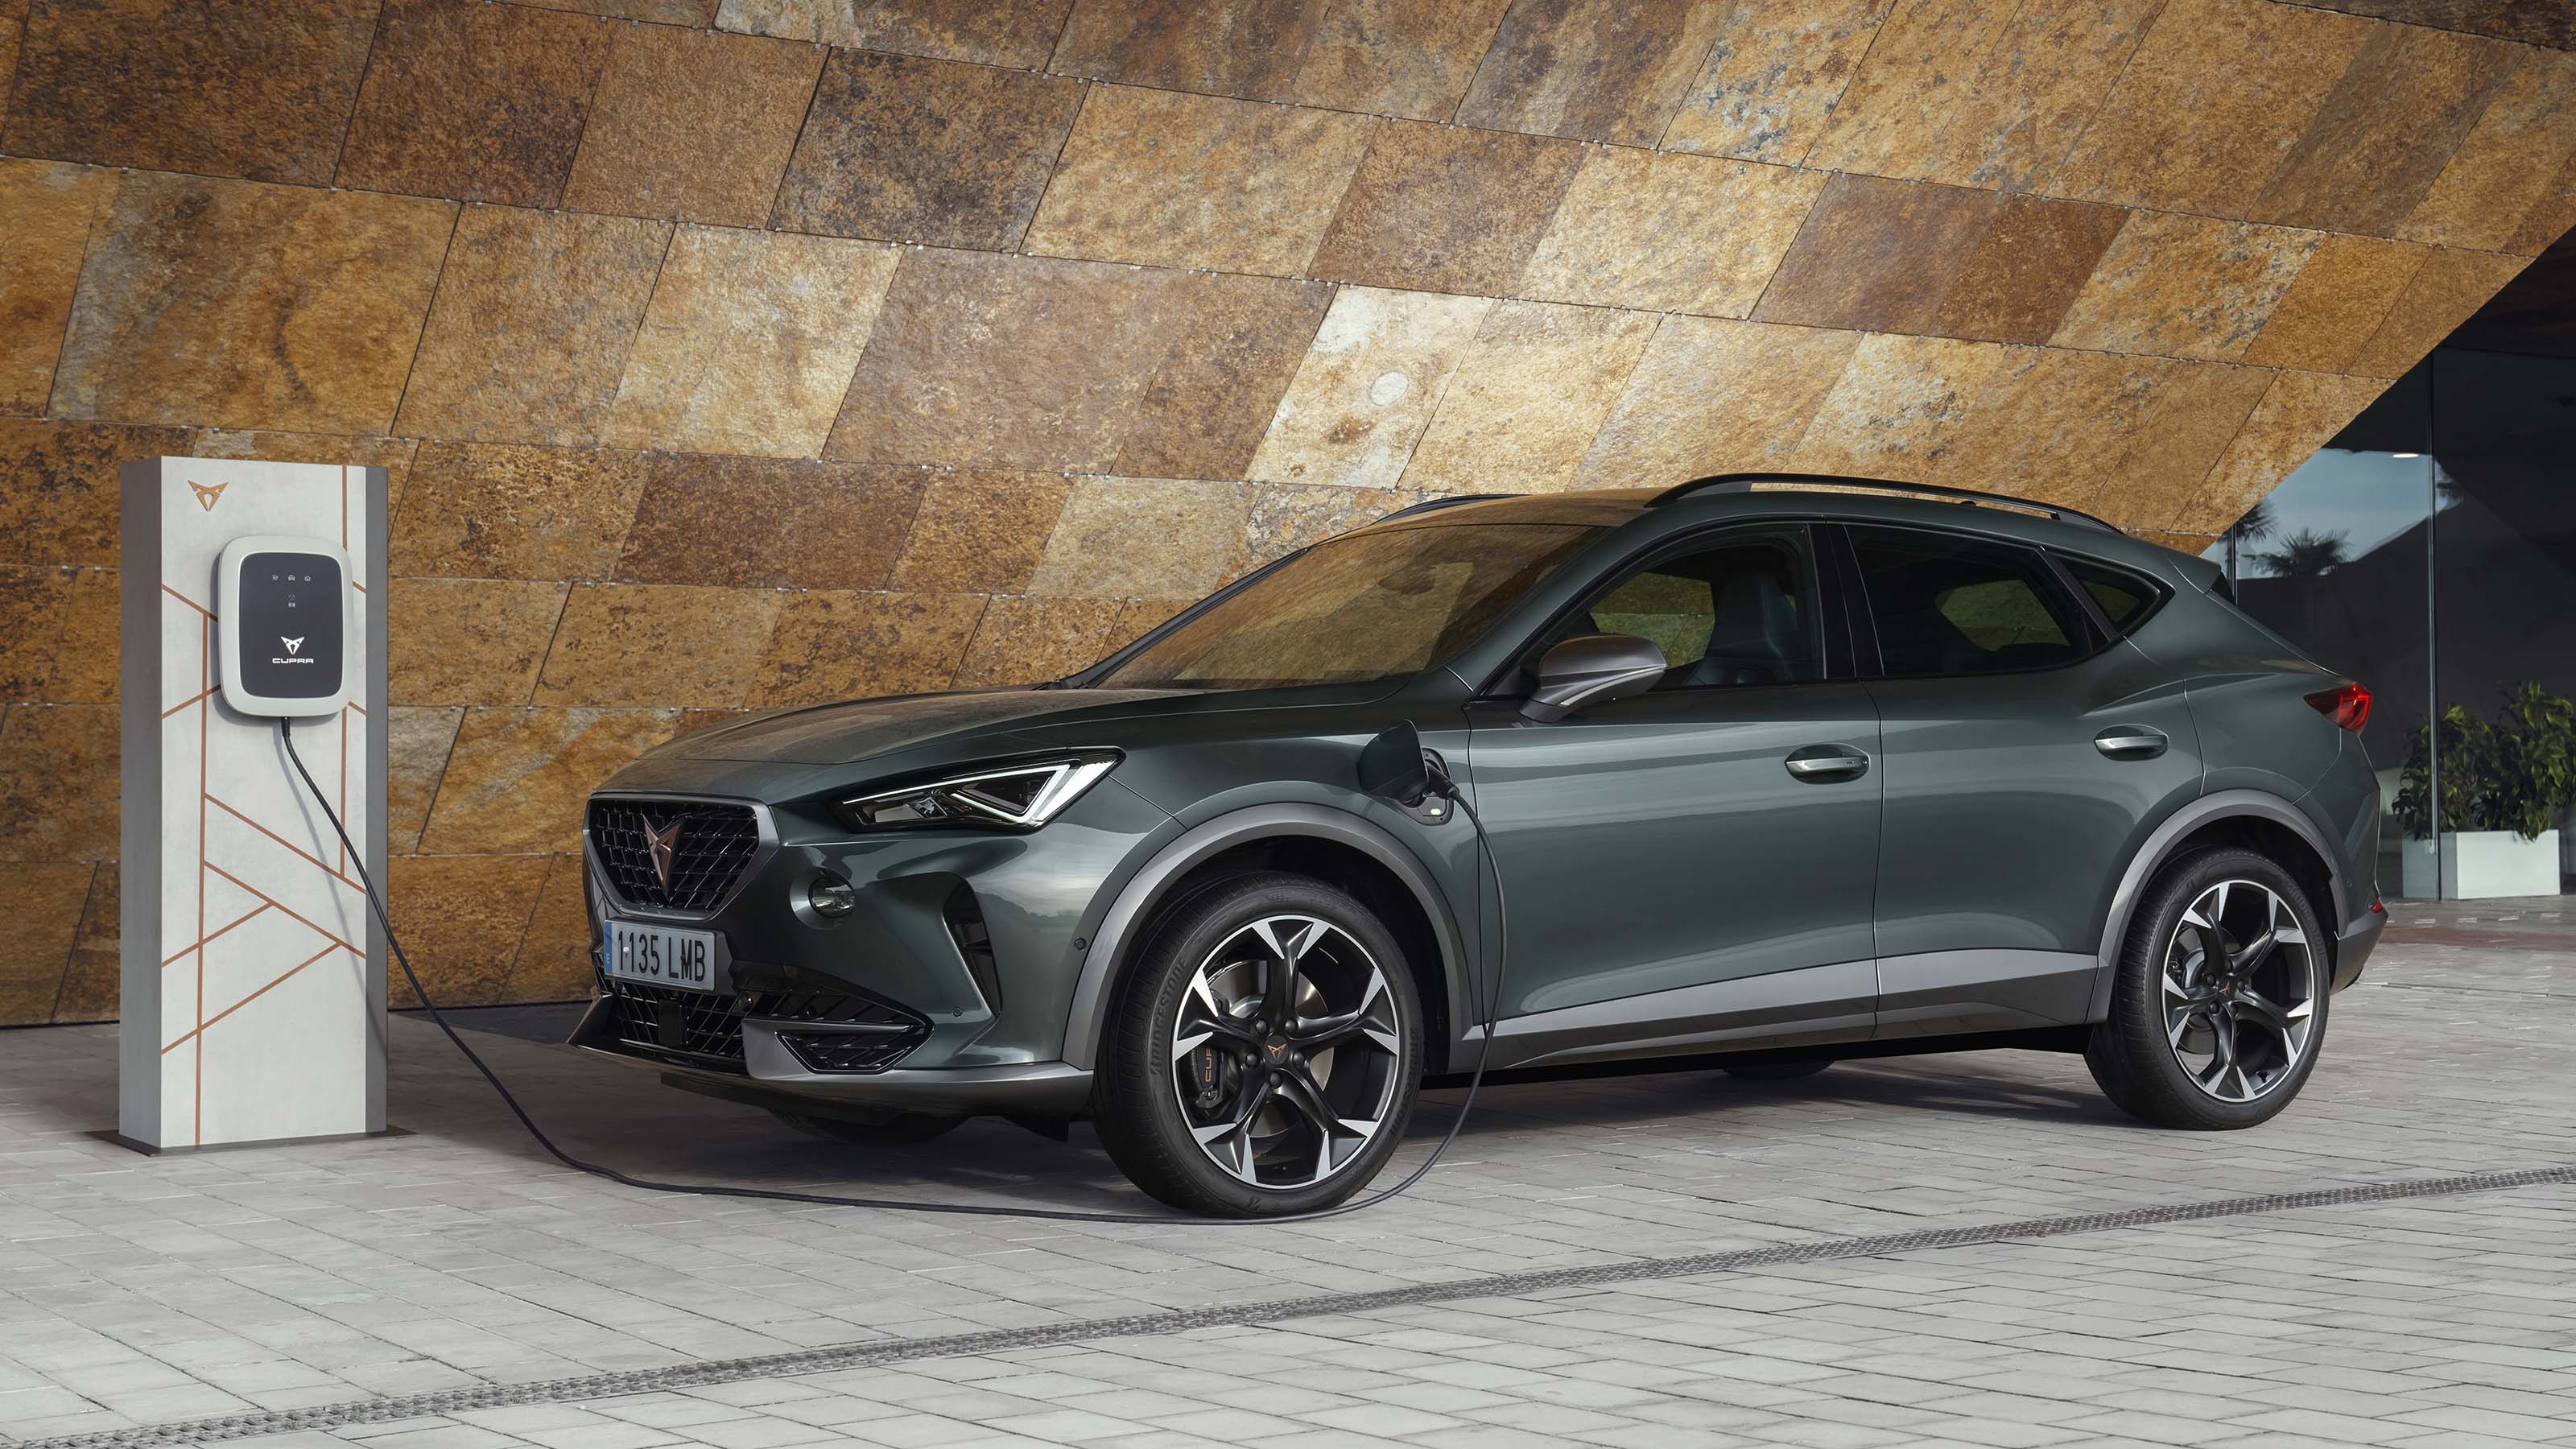 Cupra Formentor e-Hybrid 2021: specs, price and on-sale date